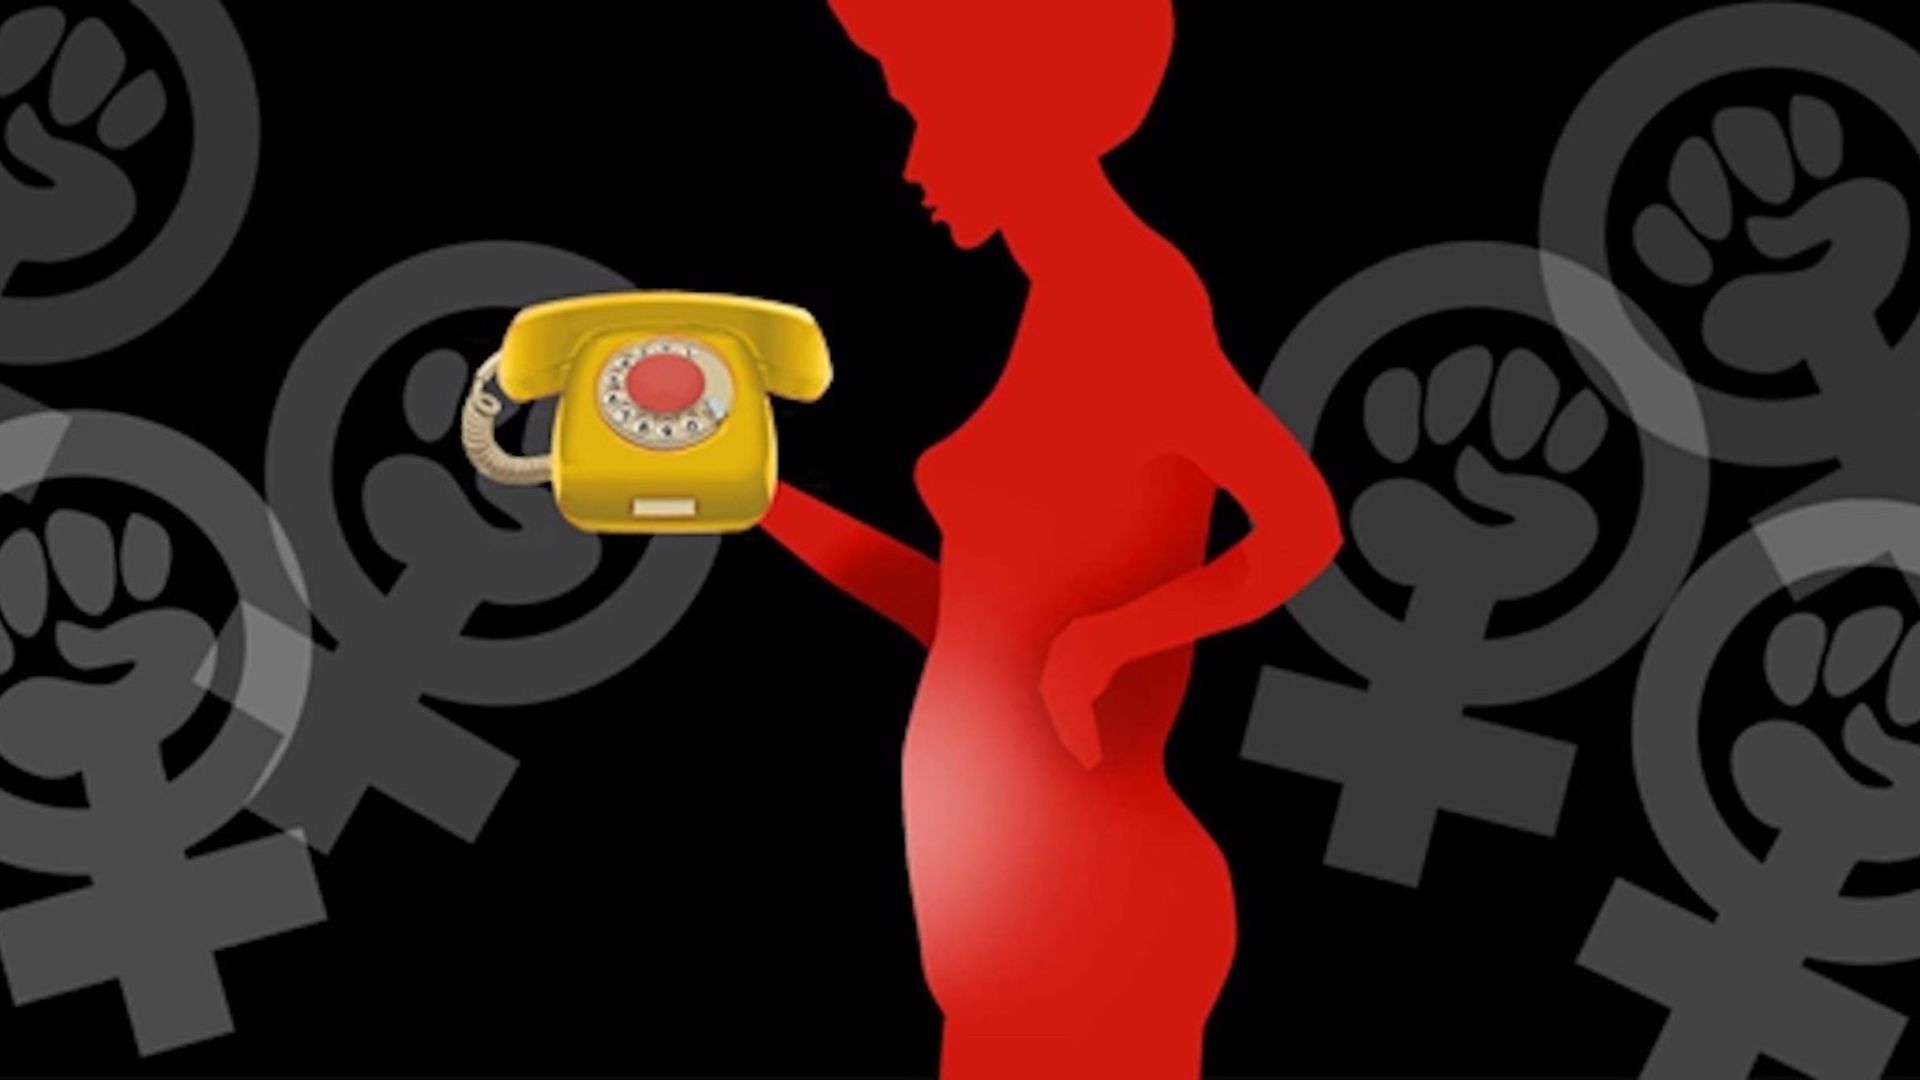 Woman's silhouette holding a phone 